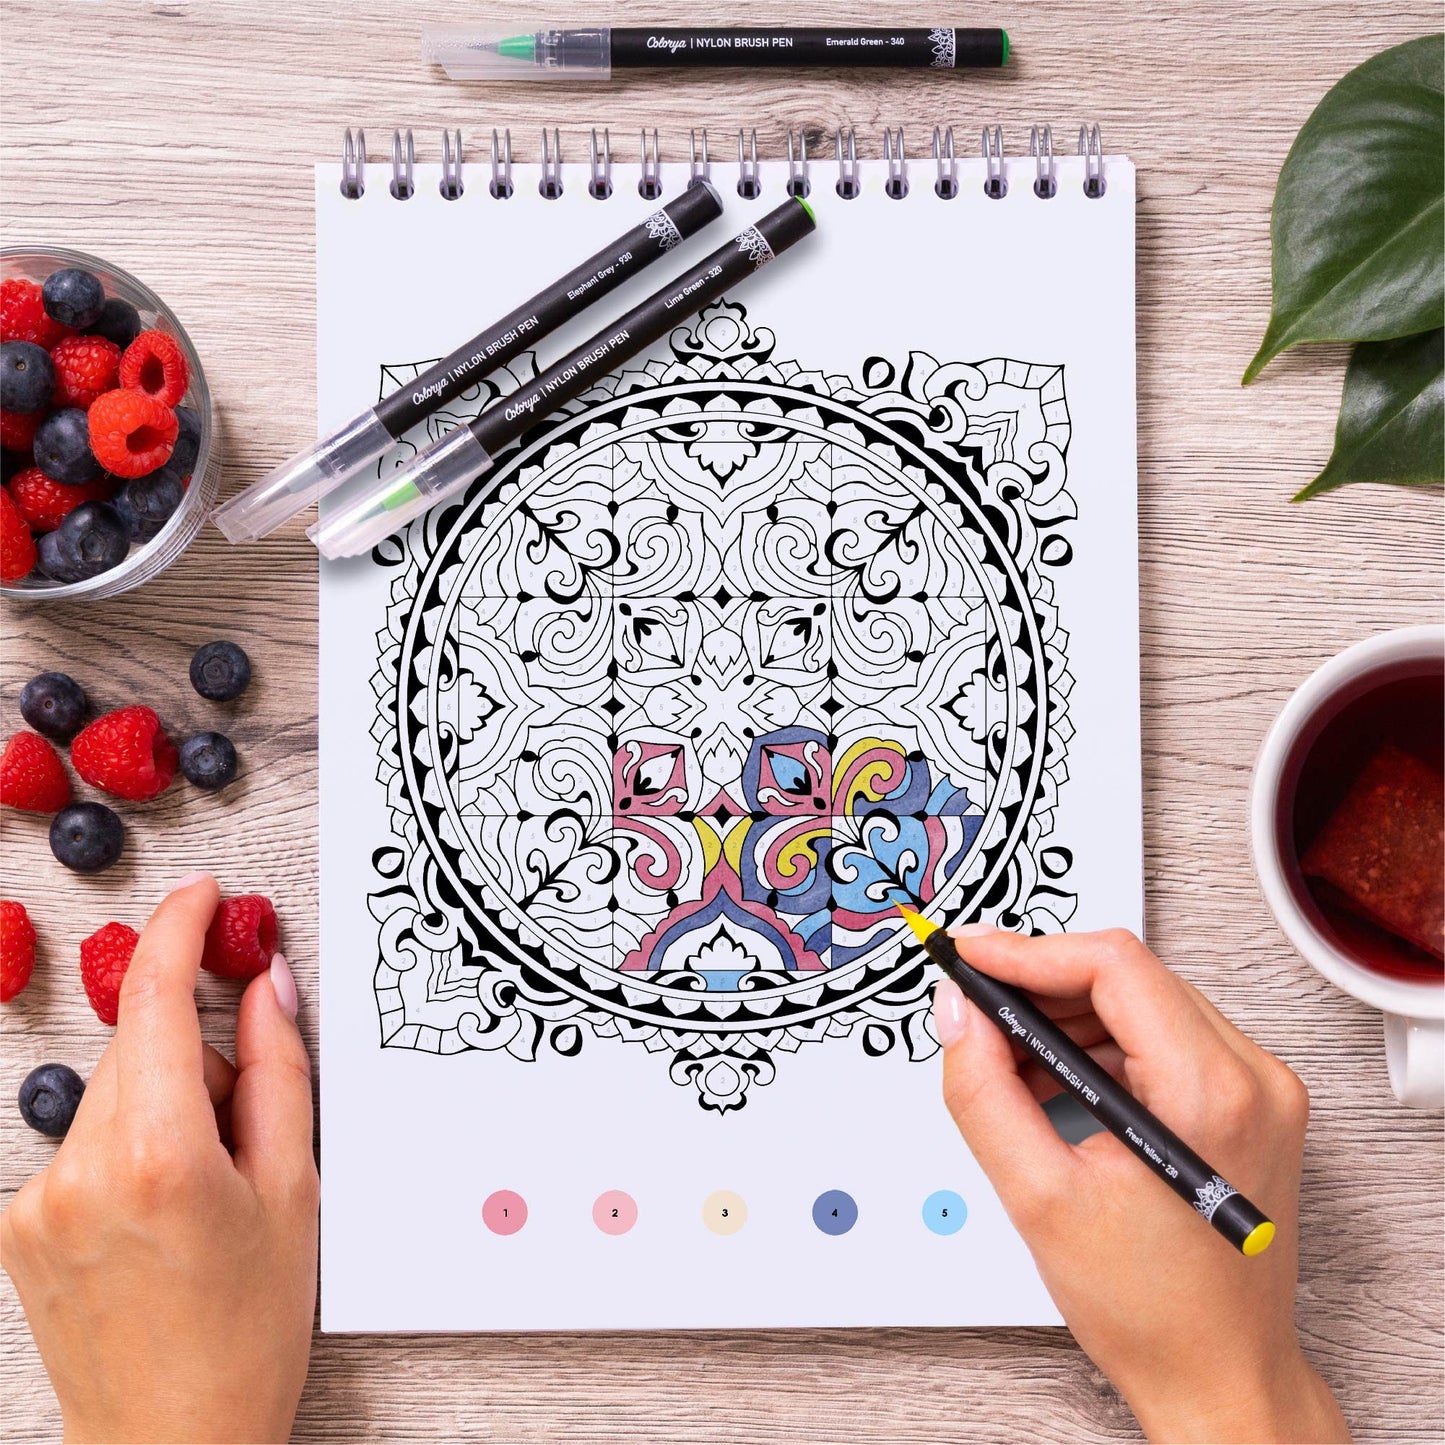 Mandalas Mystery Adult Coloring Books by Colorya - A4 Size - Coloring Books by Number for Men and Women - Premium Quality Paper, No Medium Bleeding,